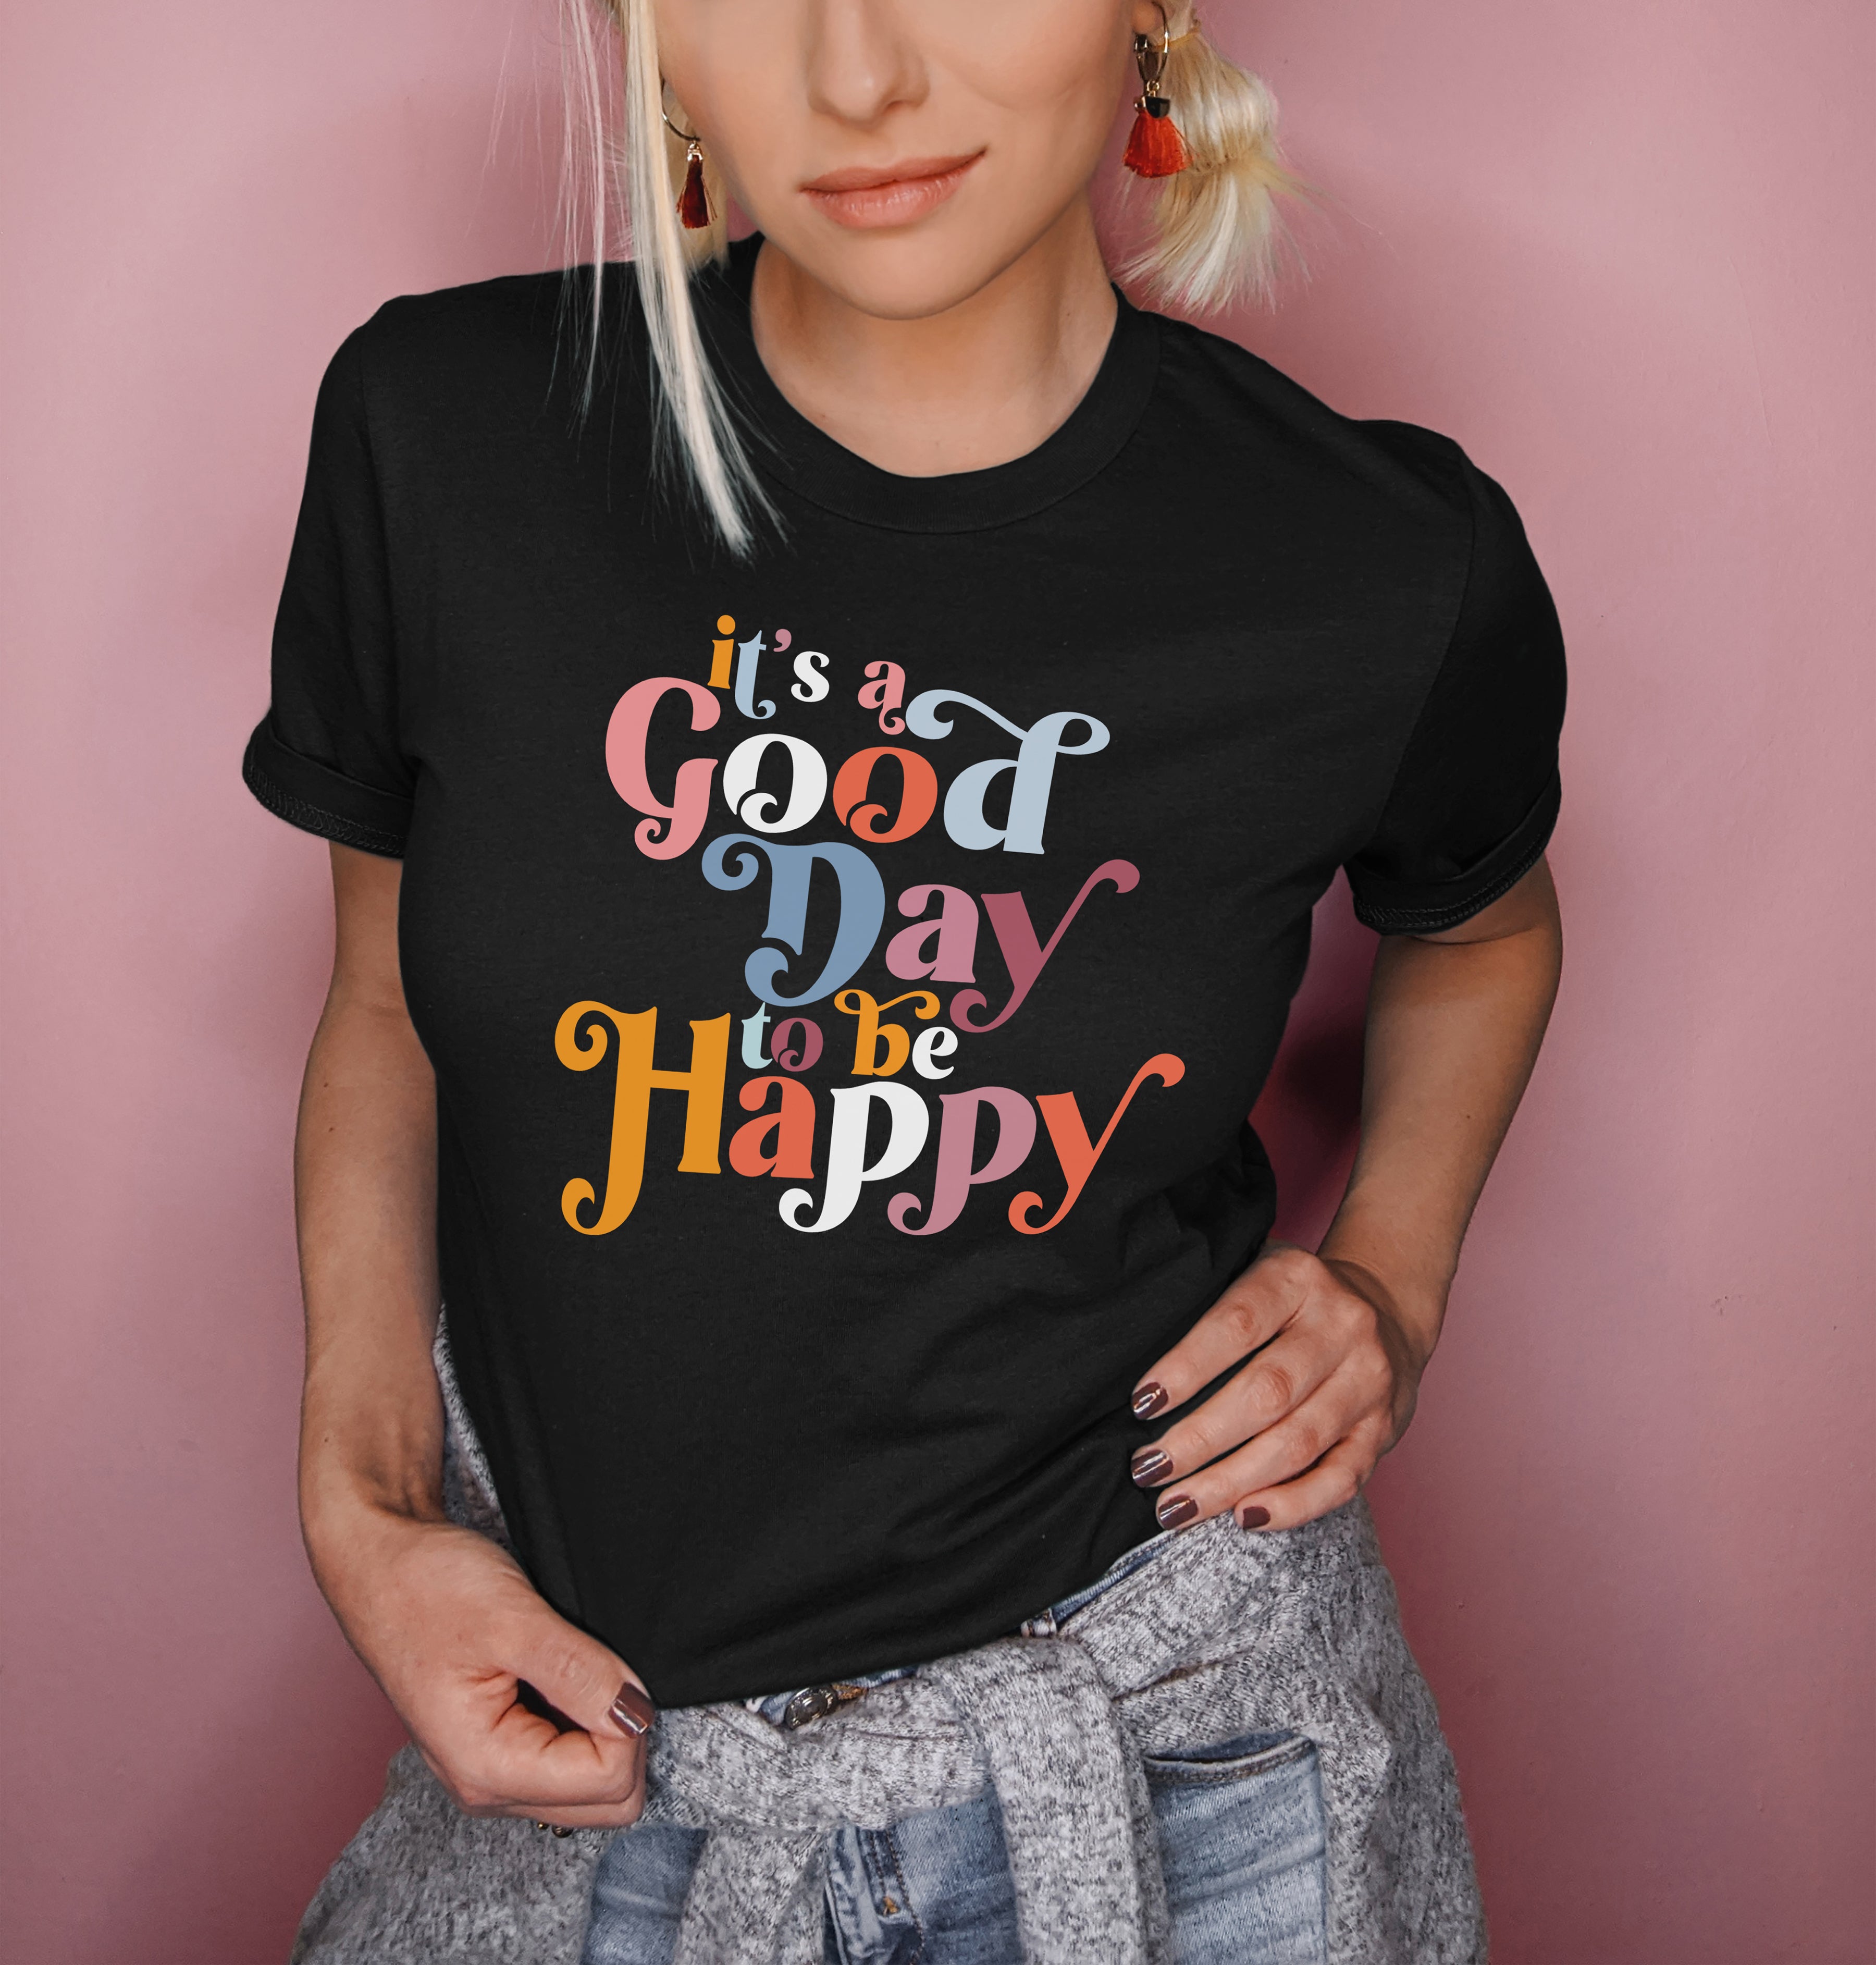 Black shirt that says it's a good day to be happy - HighCiti